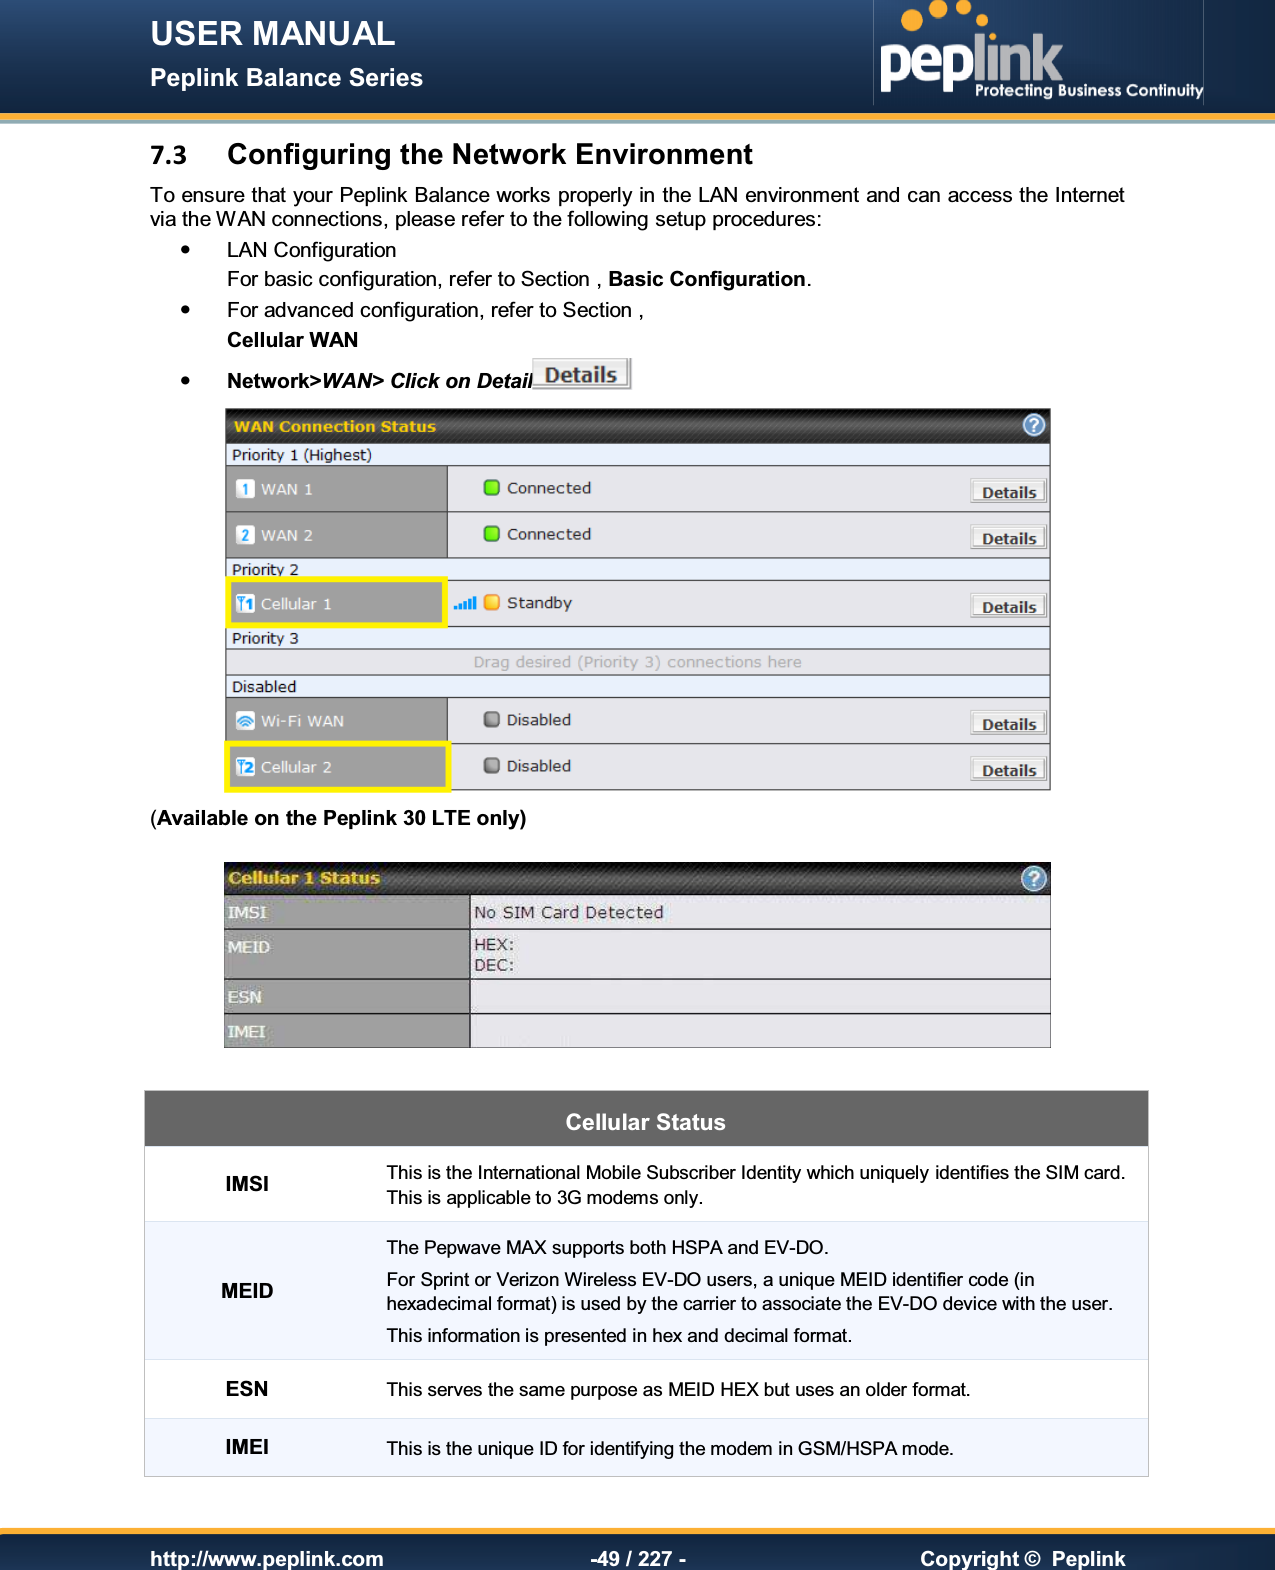 USER MANUAL Peplink Balance Series   http://www.peplink.com -49 / 227 -  Copyright ©  Peplink 7.3  Configuring the Network Environment To ensure that your Peplink Balance works properly in the LAN environment and can access the Internet via the WAN connections, please refer to the following setup procedures:   LAN Configuration  For basic configuration, refer to Section , Basic Configuration.   For advanced configuration, refer to Section ,  Cellular WAN  Network&gt;WAN&gt; Click on Detail   (Available on the Peplink 30 LTE only)    Cellular Status IMSI  This is the International Mobile Subscriber Identity which uniquely identifies the SIM card.  This is applicable to 3G modems only. MEID The Pepwave MAX supports both HSPA and EV-DO.  For Sprint or Verizon Wireless EV-DO users, a unique MEID identifier code (in hexadecimal format) is used by the carrier to associate the EV-DO device with the user. This information is presented in hex and decimal format. ESN  This serves the same purpose as MEID HEX but uses an older format. IMEI  This is the unique ID for identifying the modem in GSM/HSPA mode. 